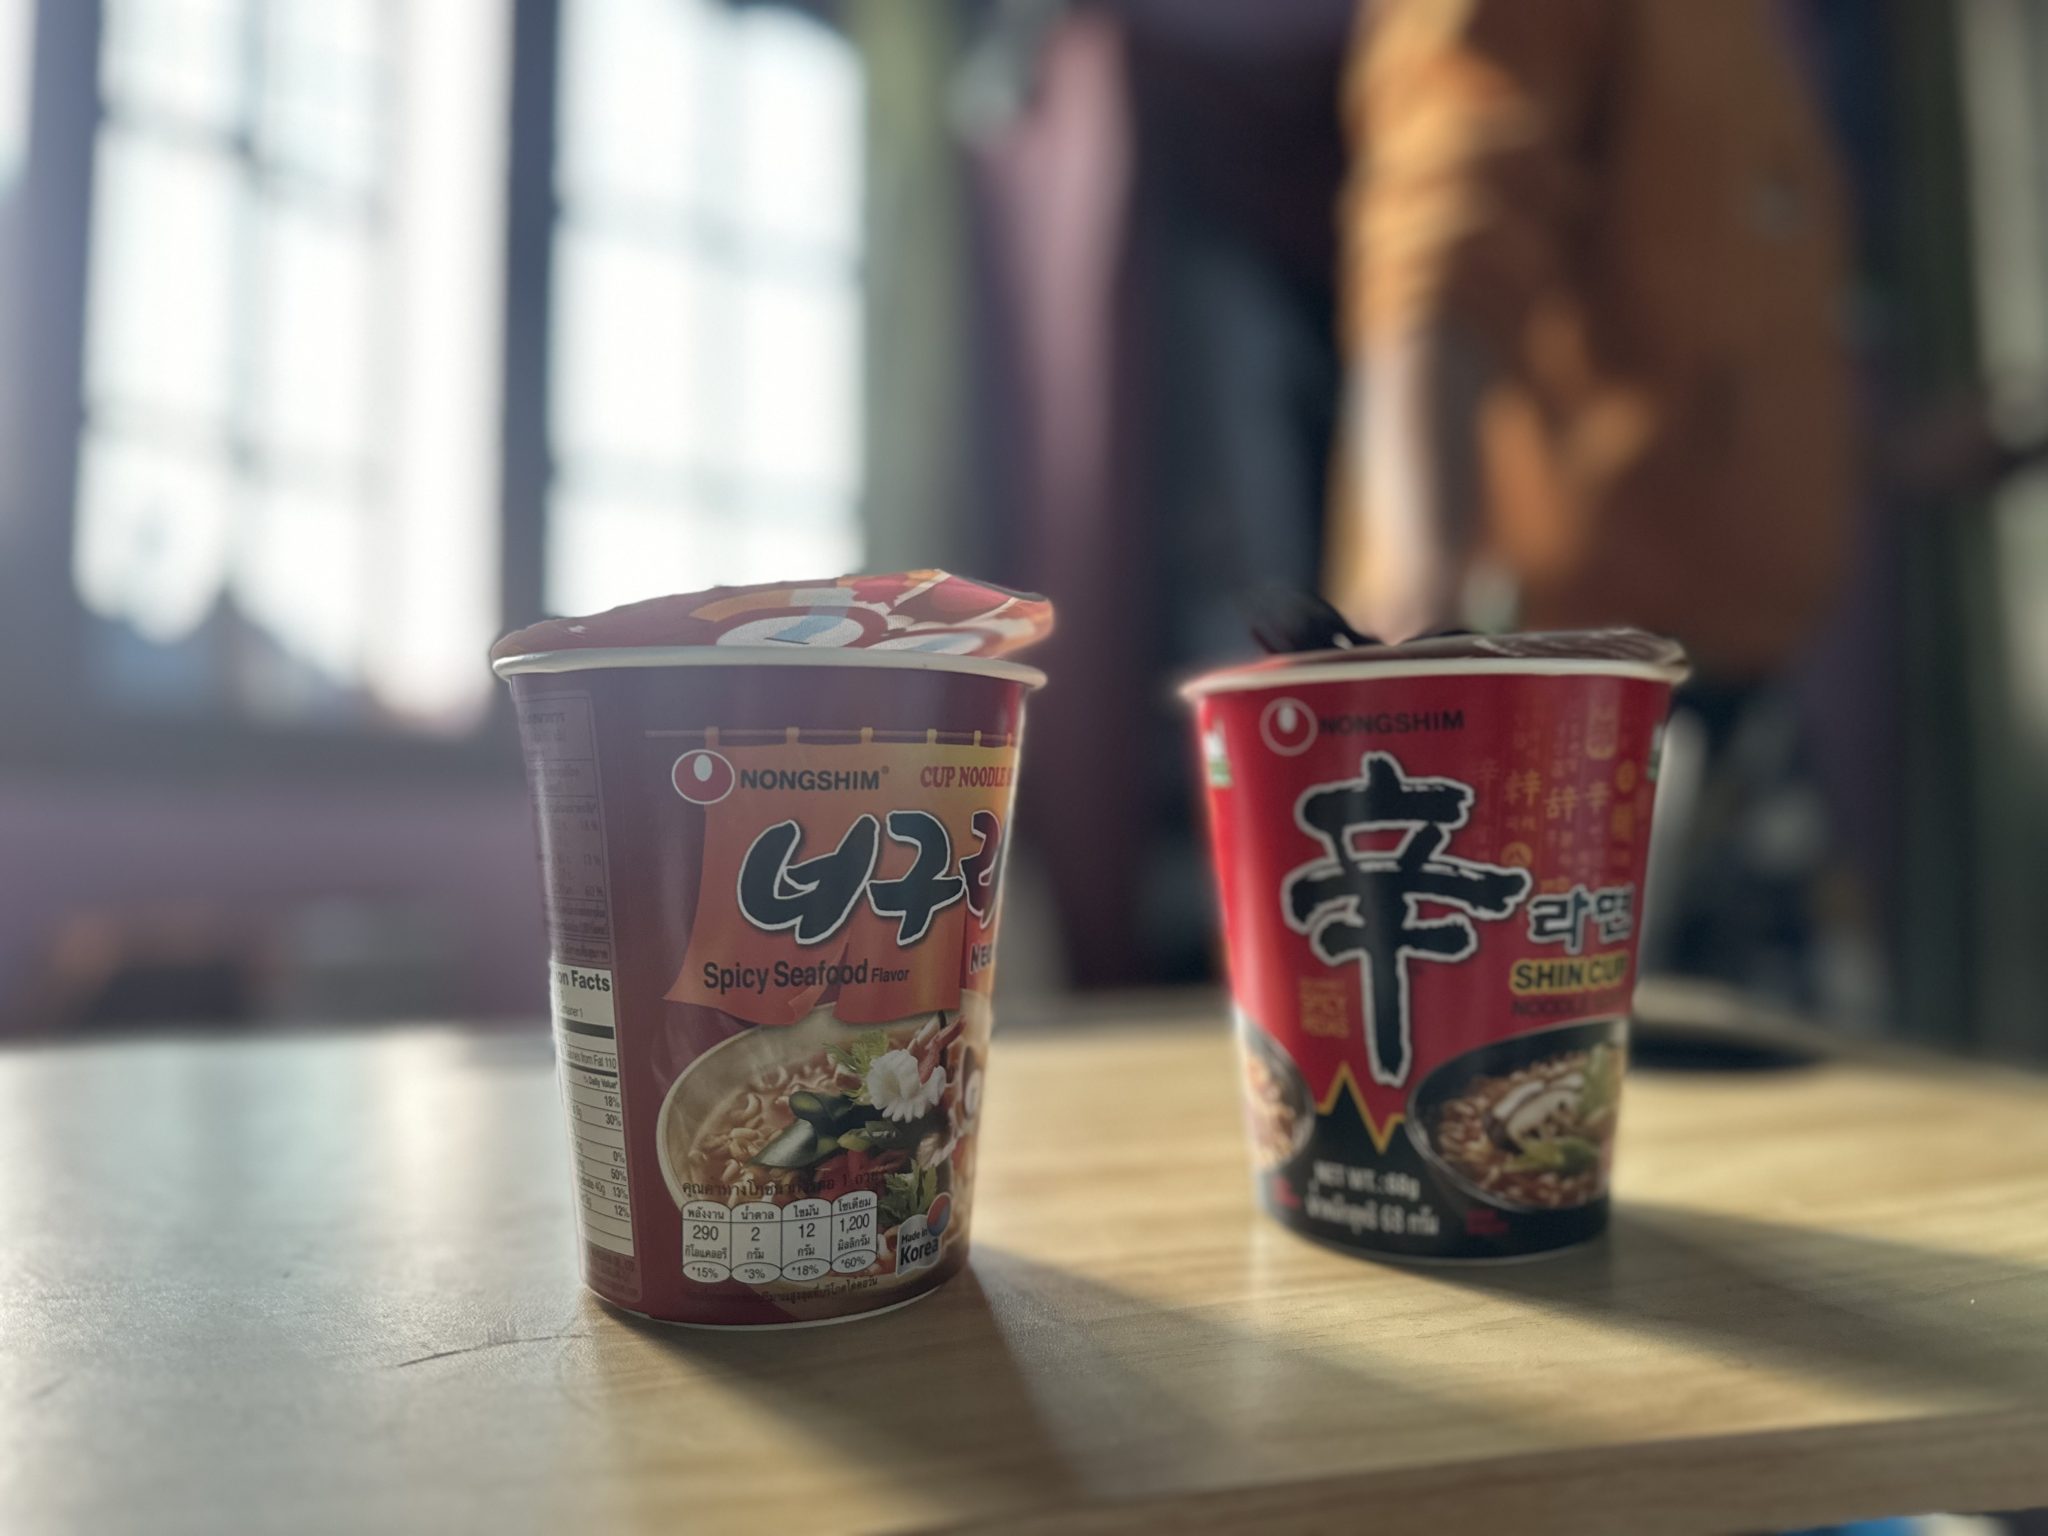 Cup Noodles is popular in Japan, Korea and Thailand.